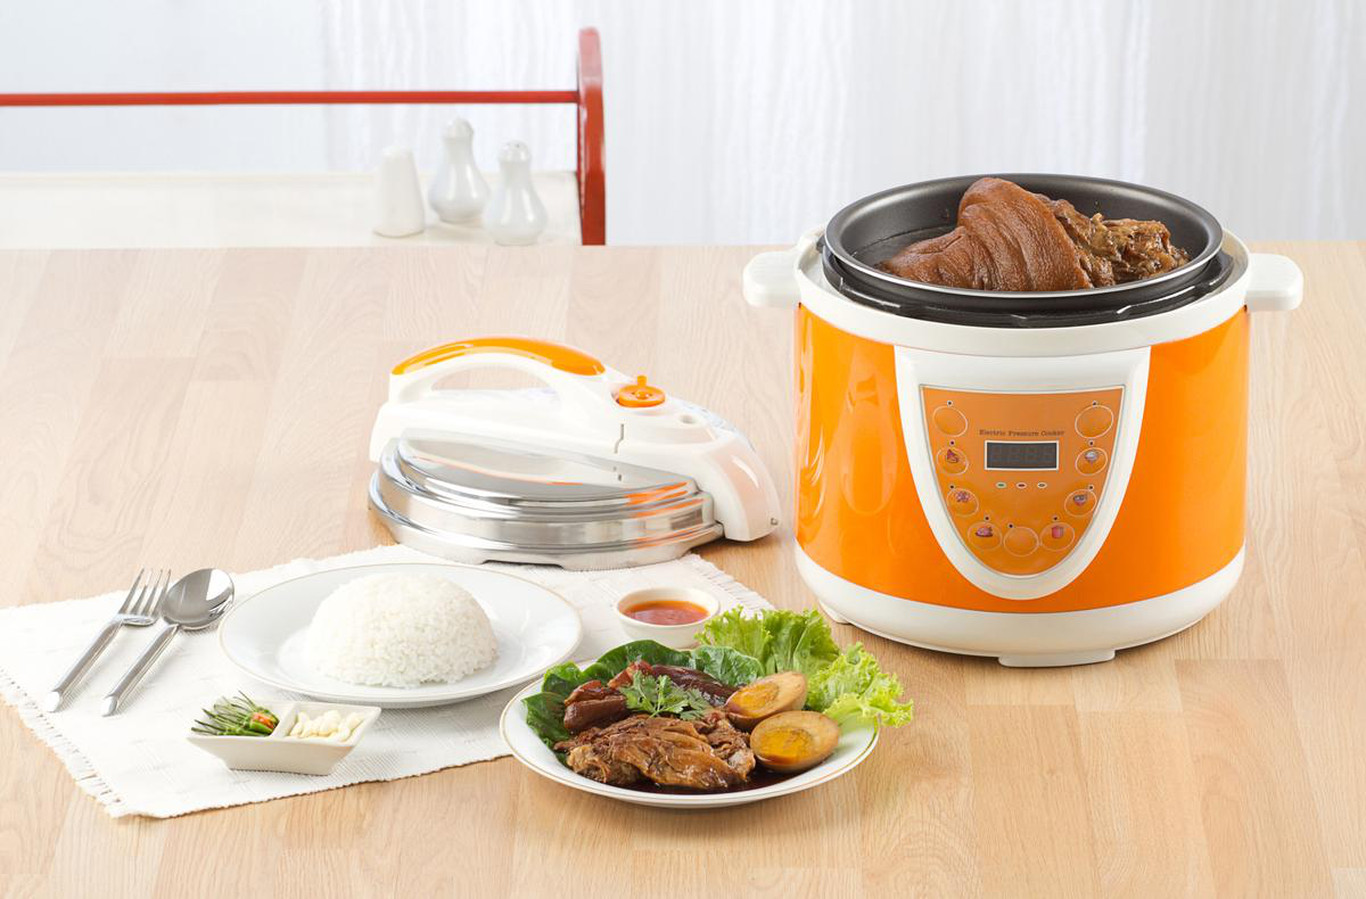 What Can You Cook With An Electric Pressure Cooker